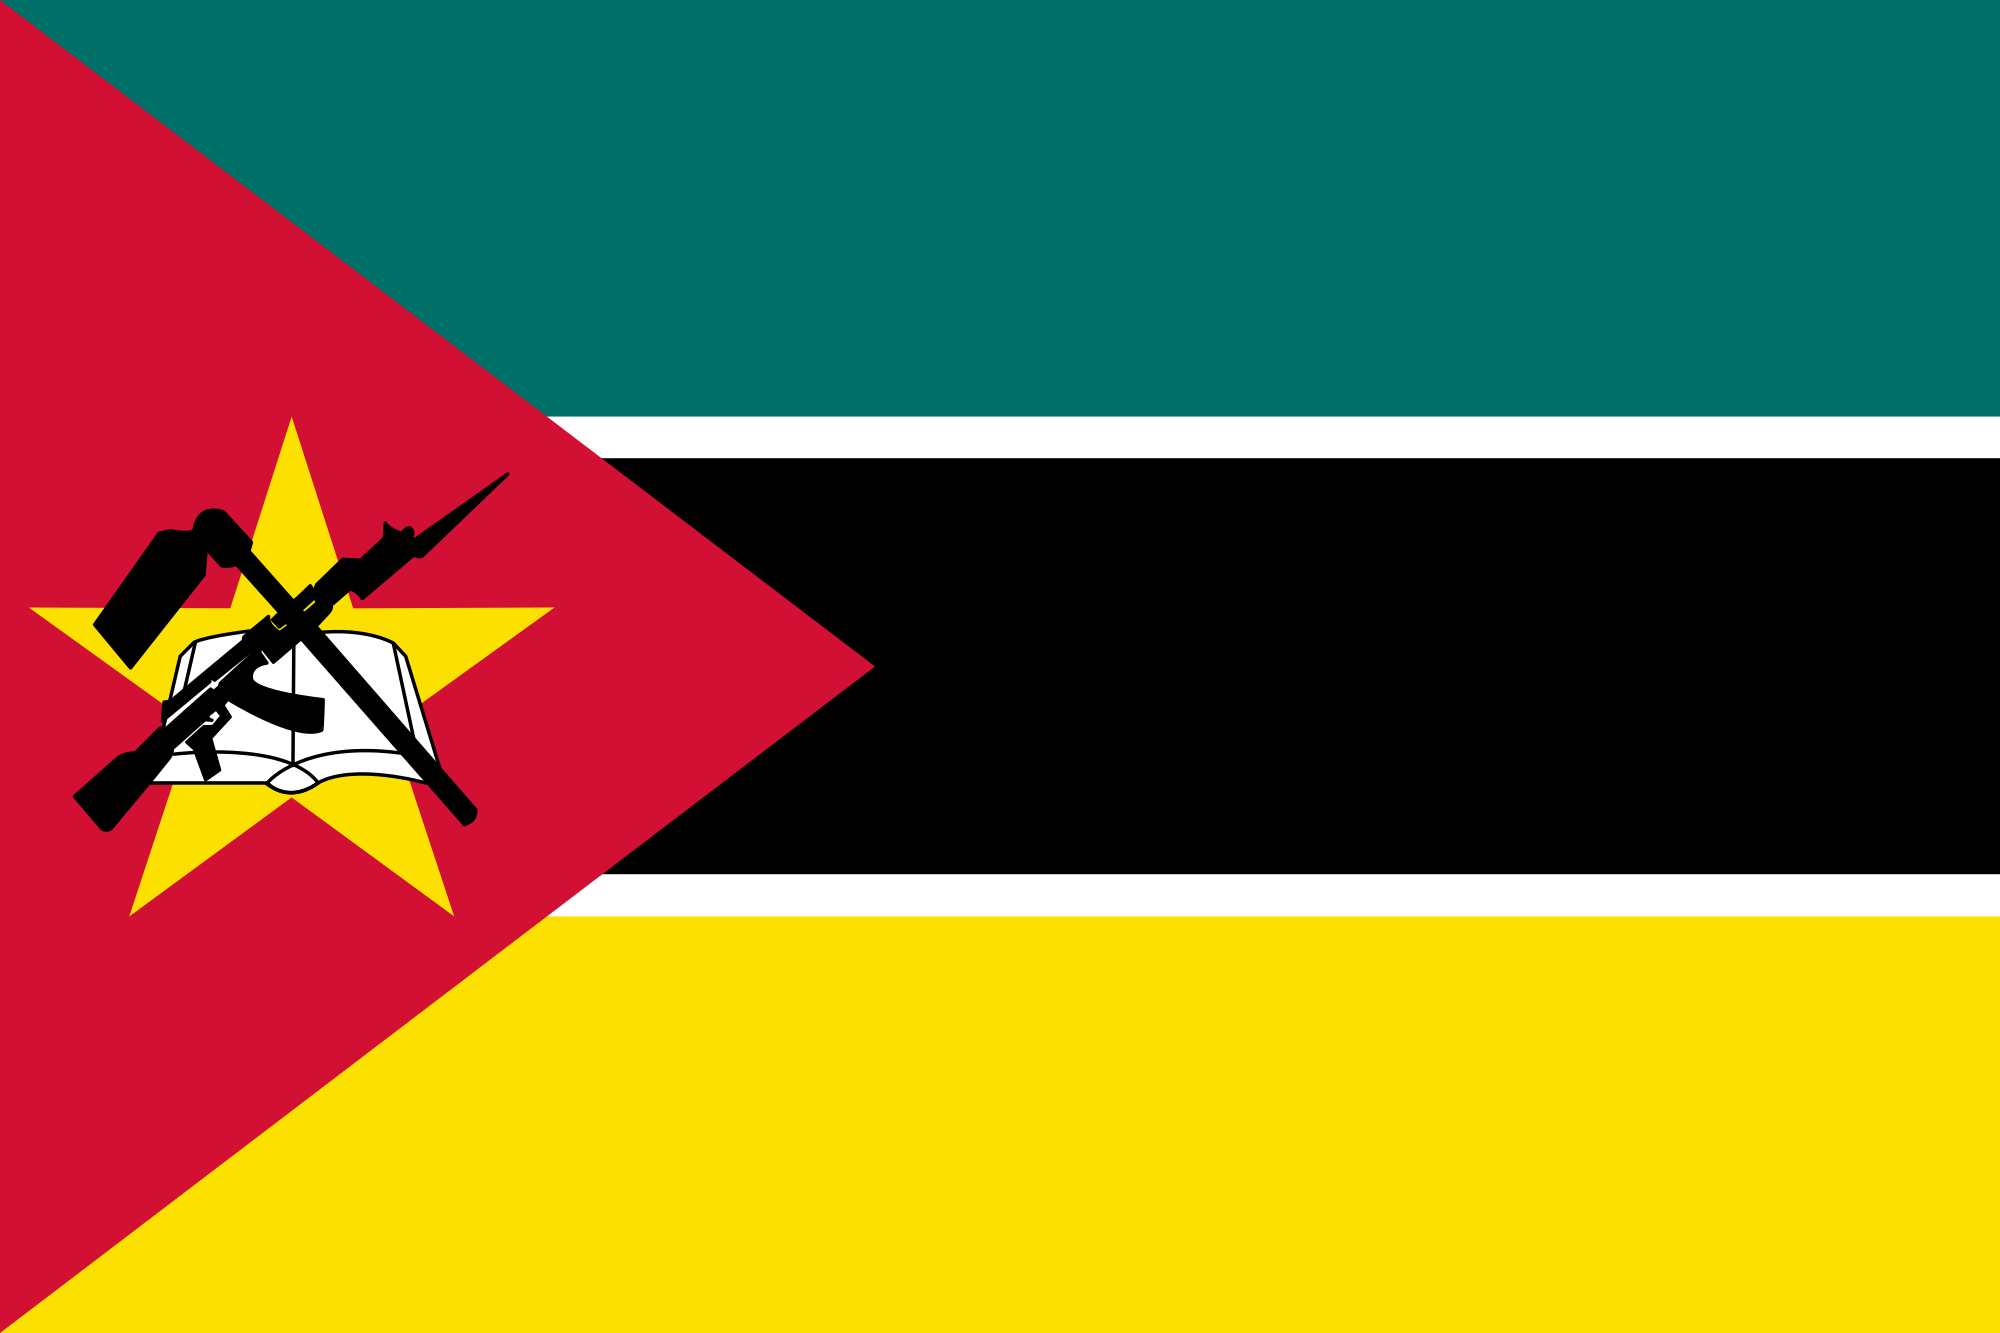 2000px-Flag_of_Mozambique.svg.png